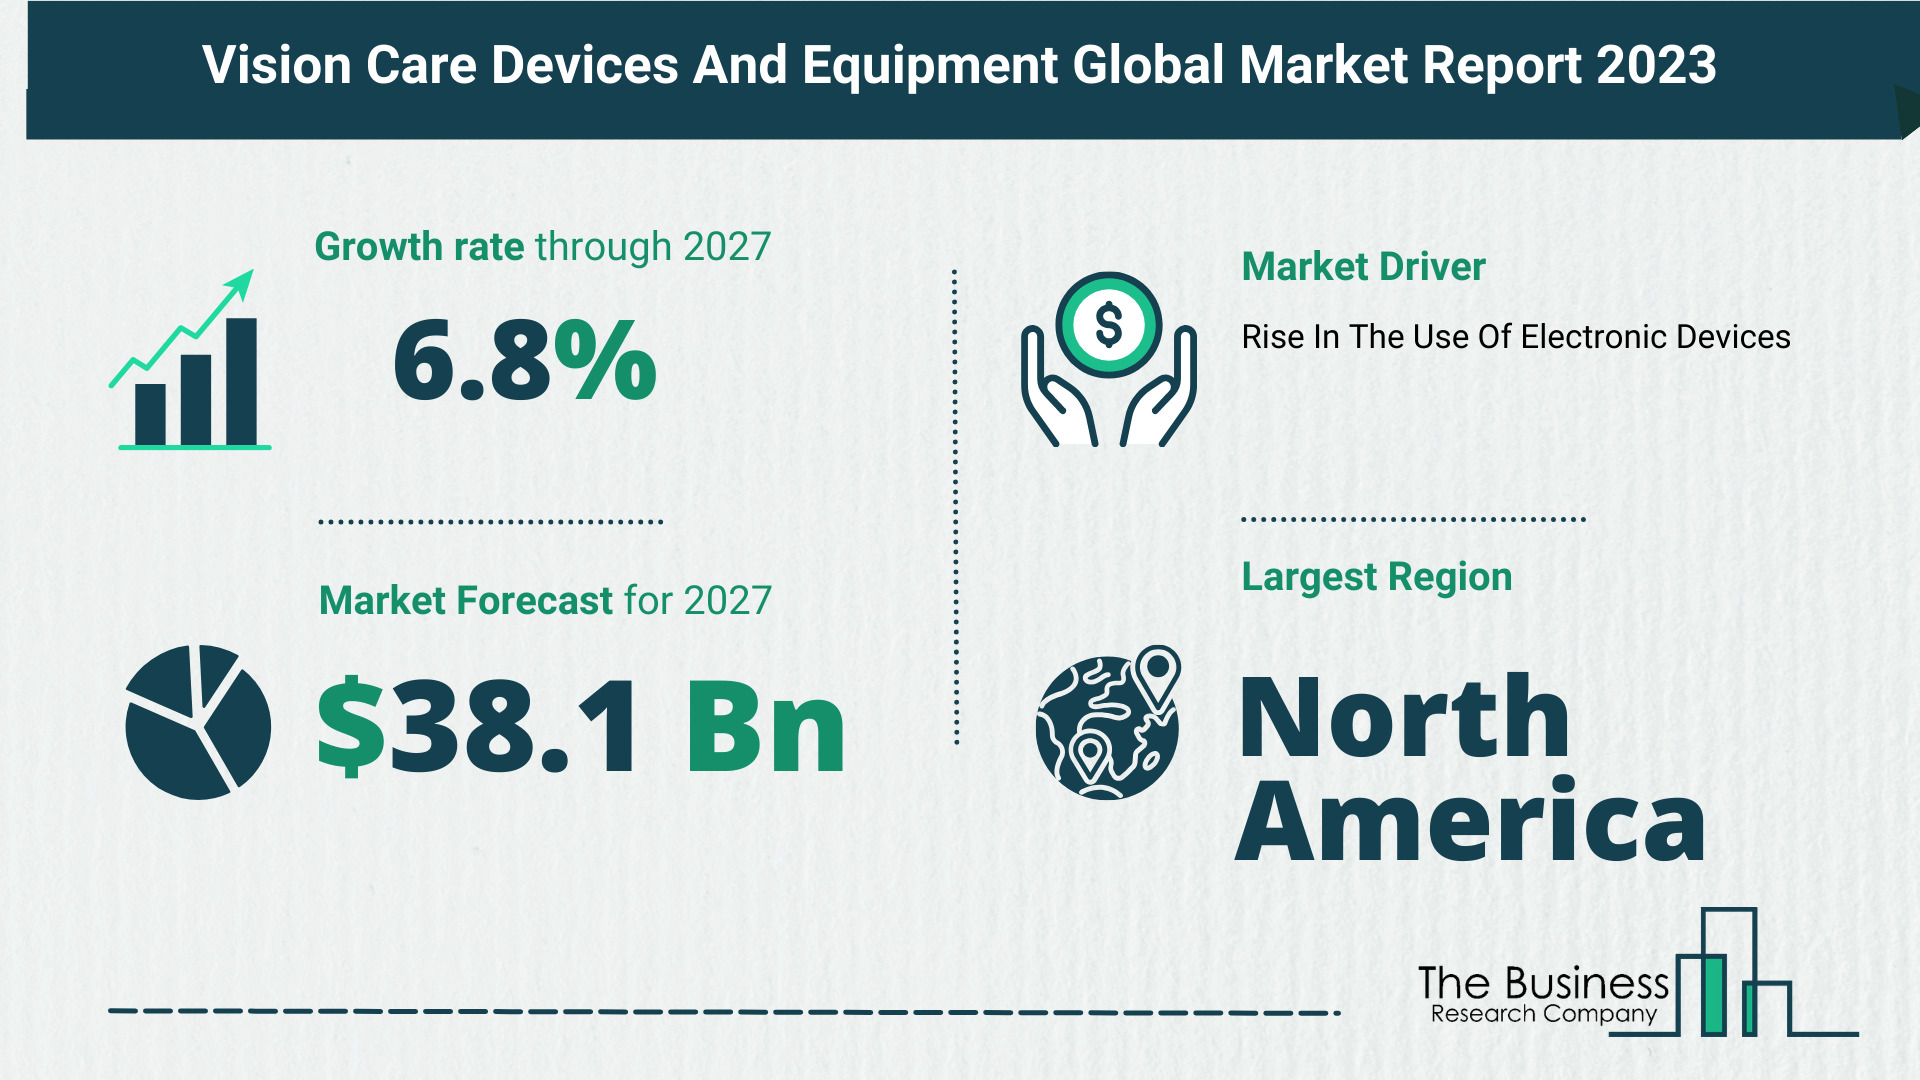 Global Vision Care Devices And Equipment Market Size